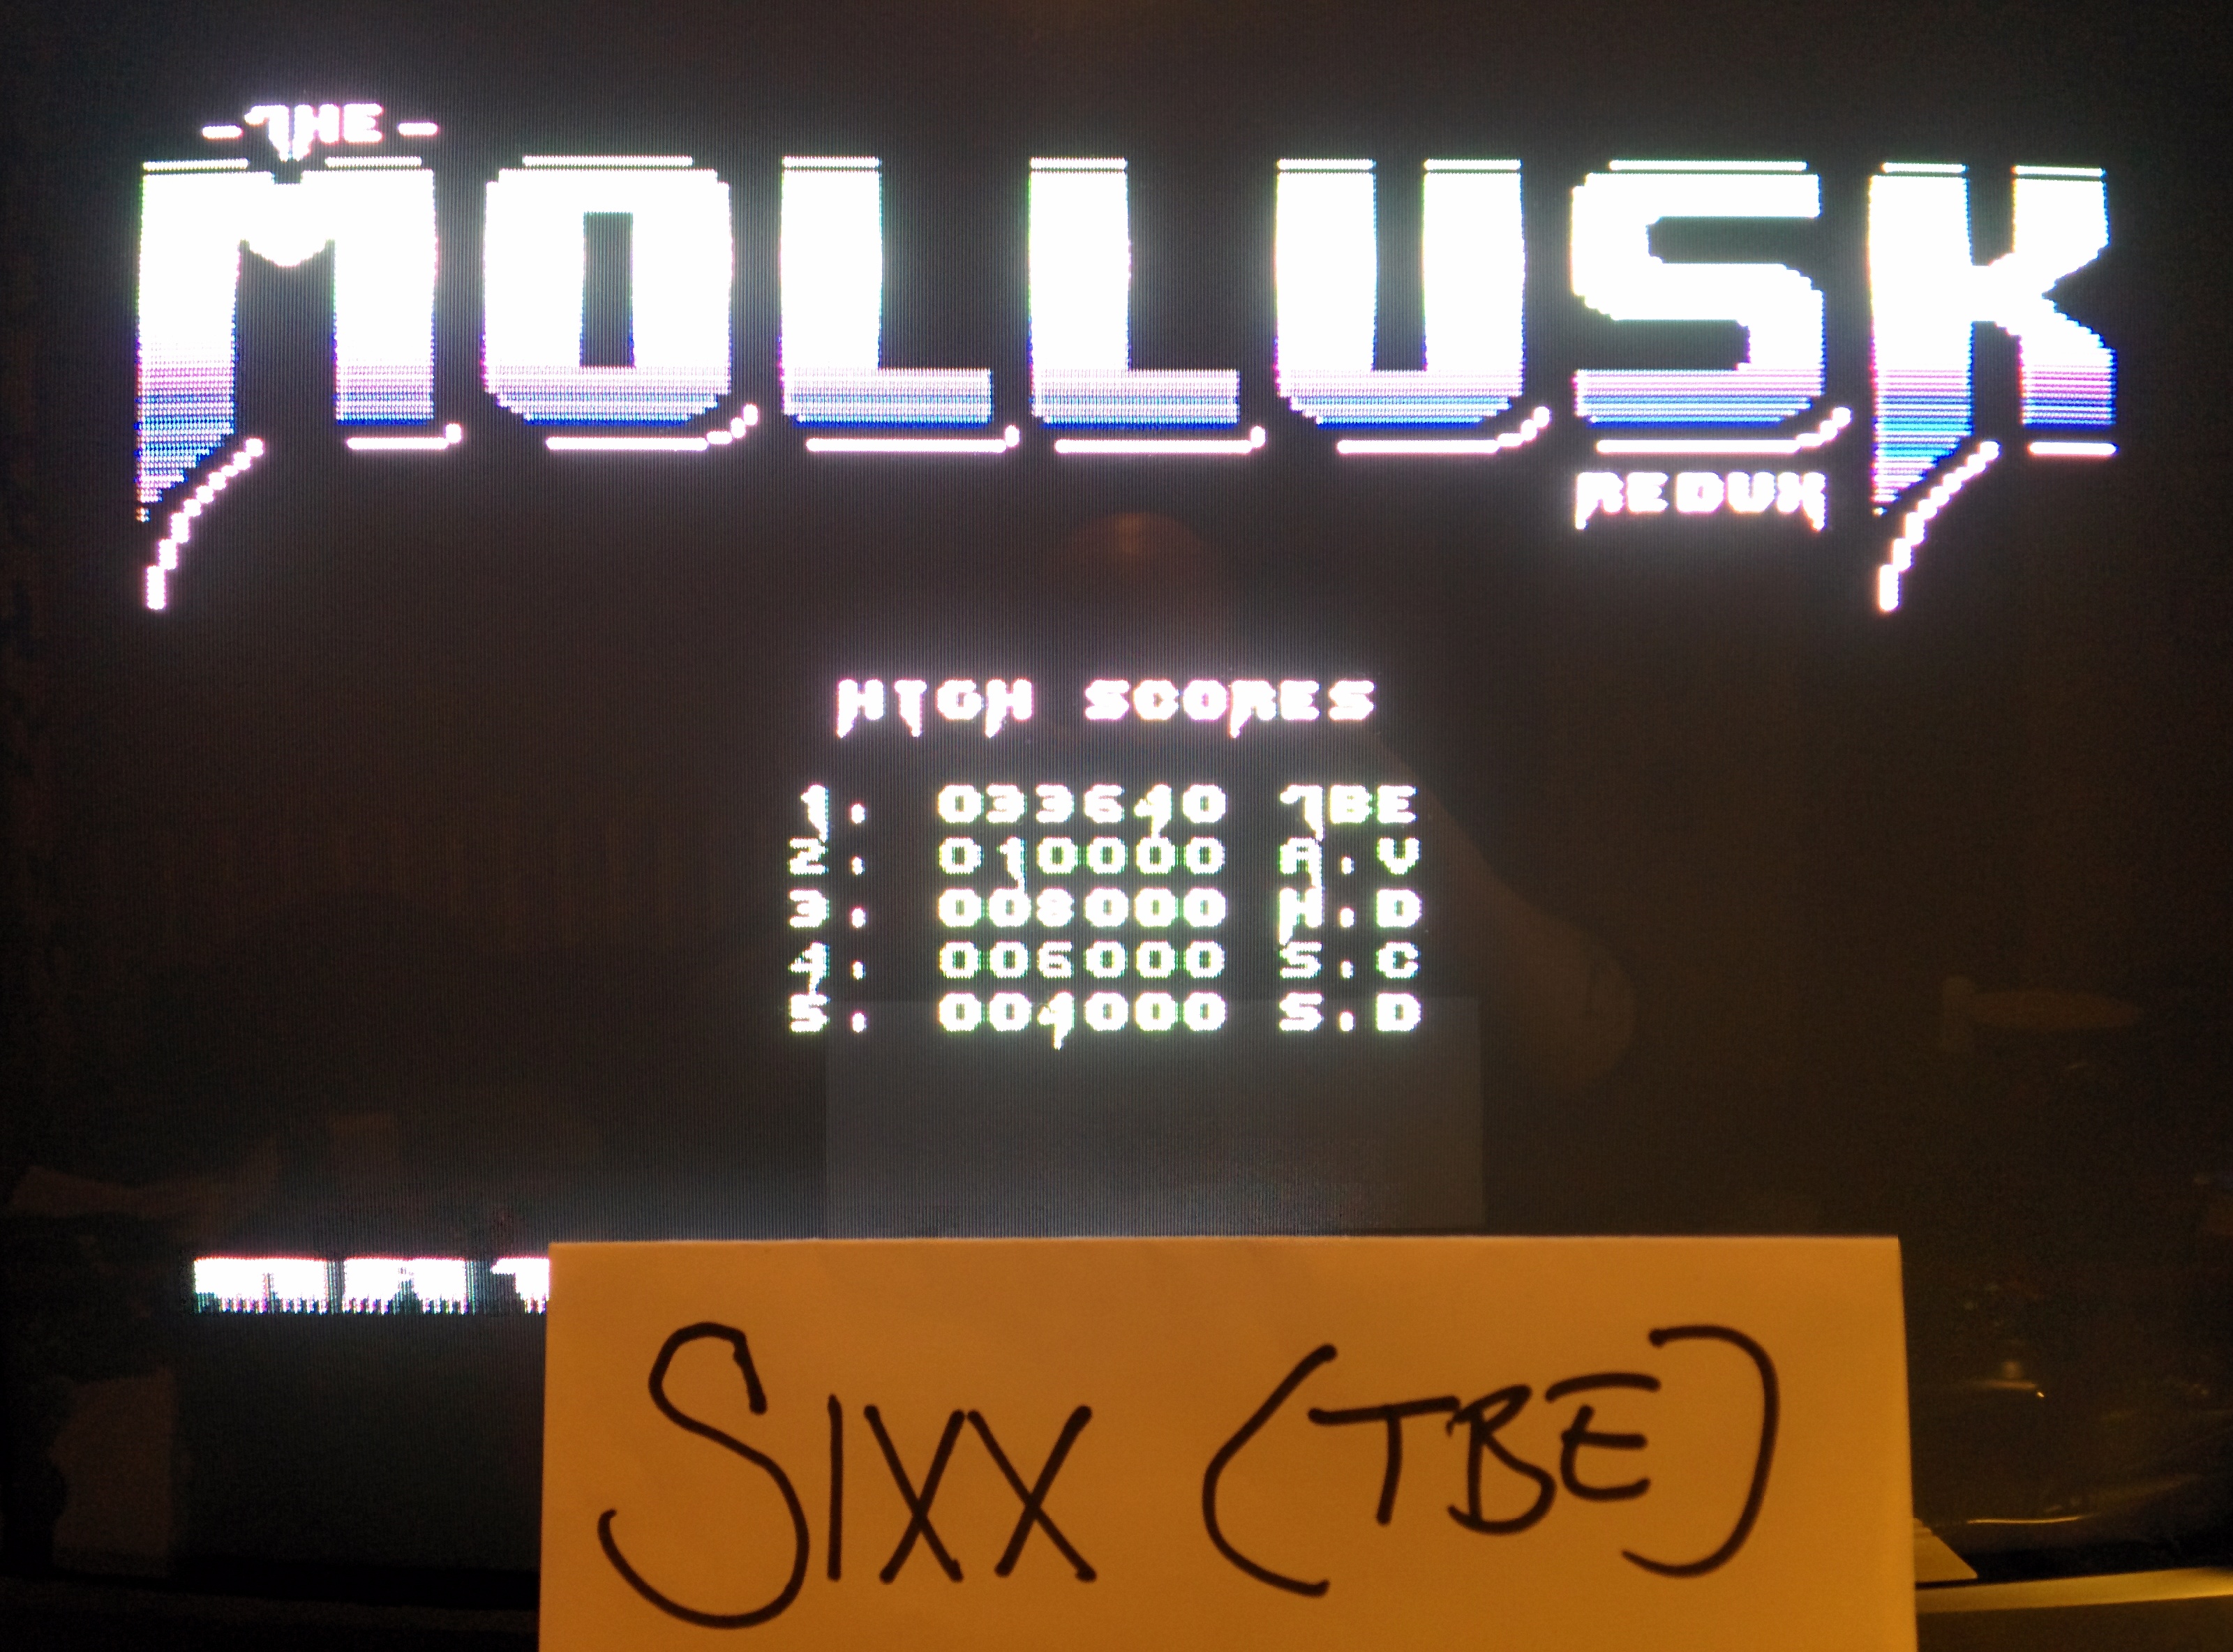 Sixx: Mollusk Redux (Commodore 64) 33,640 points on 2014-05-08 16:39:10